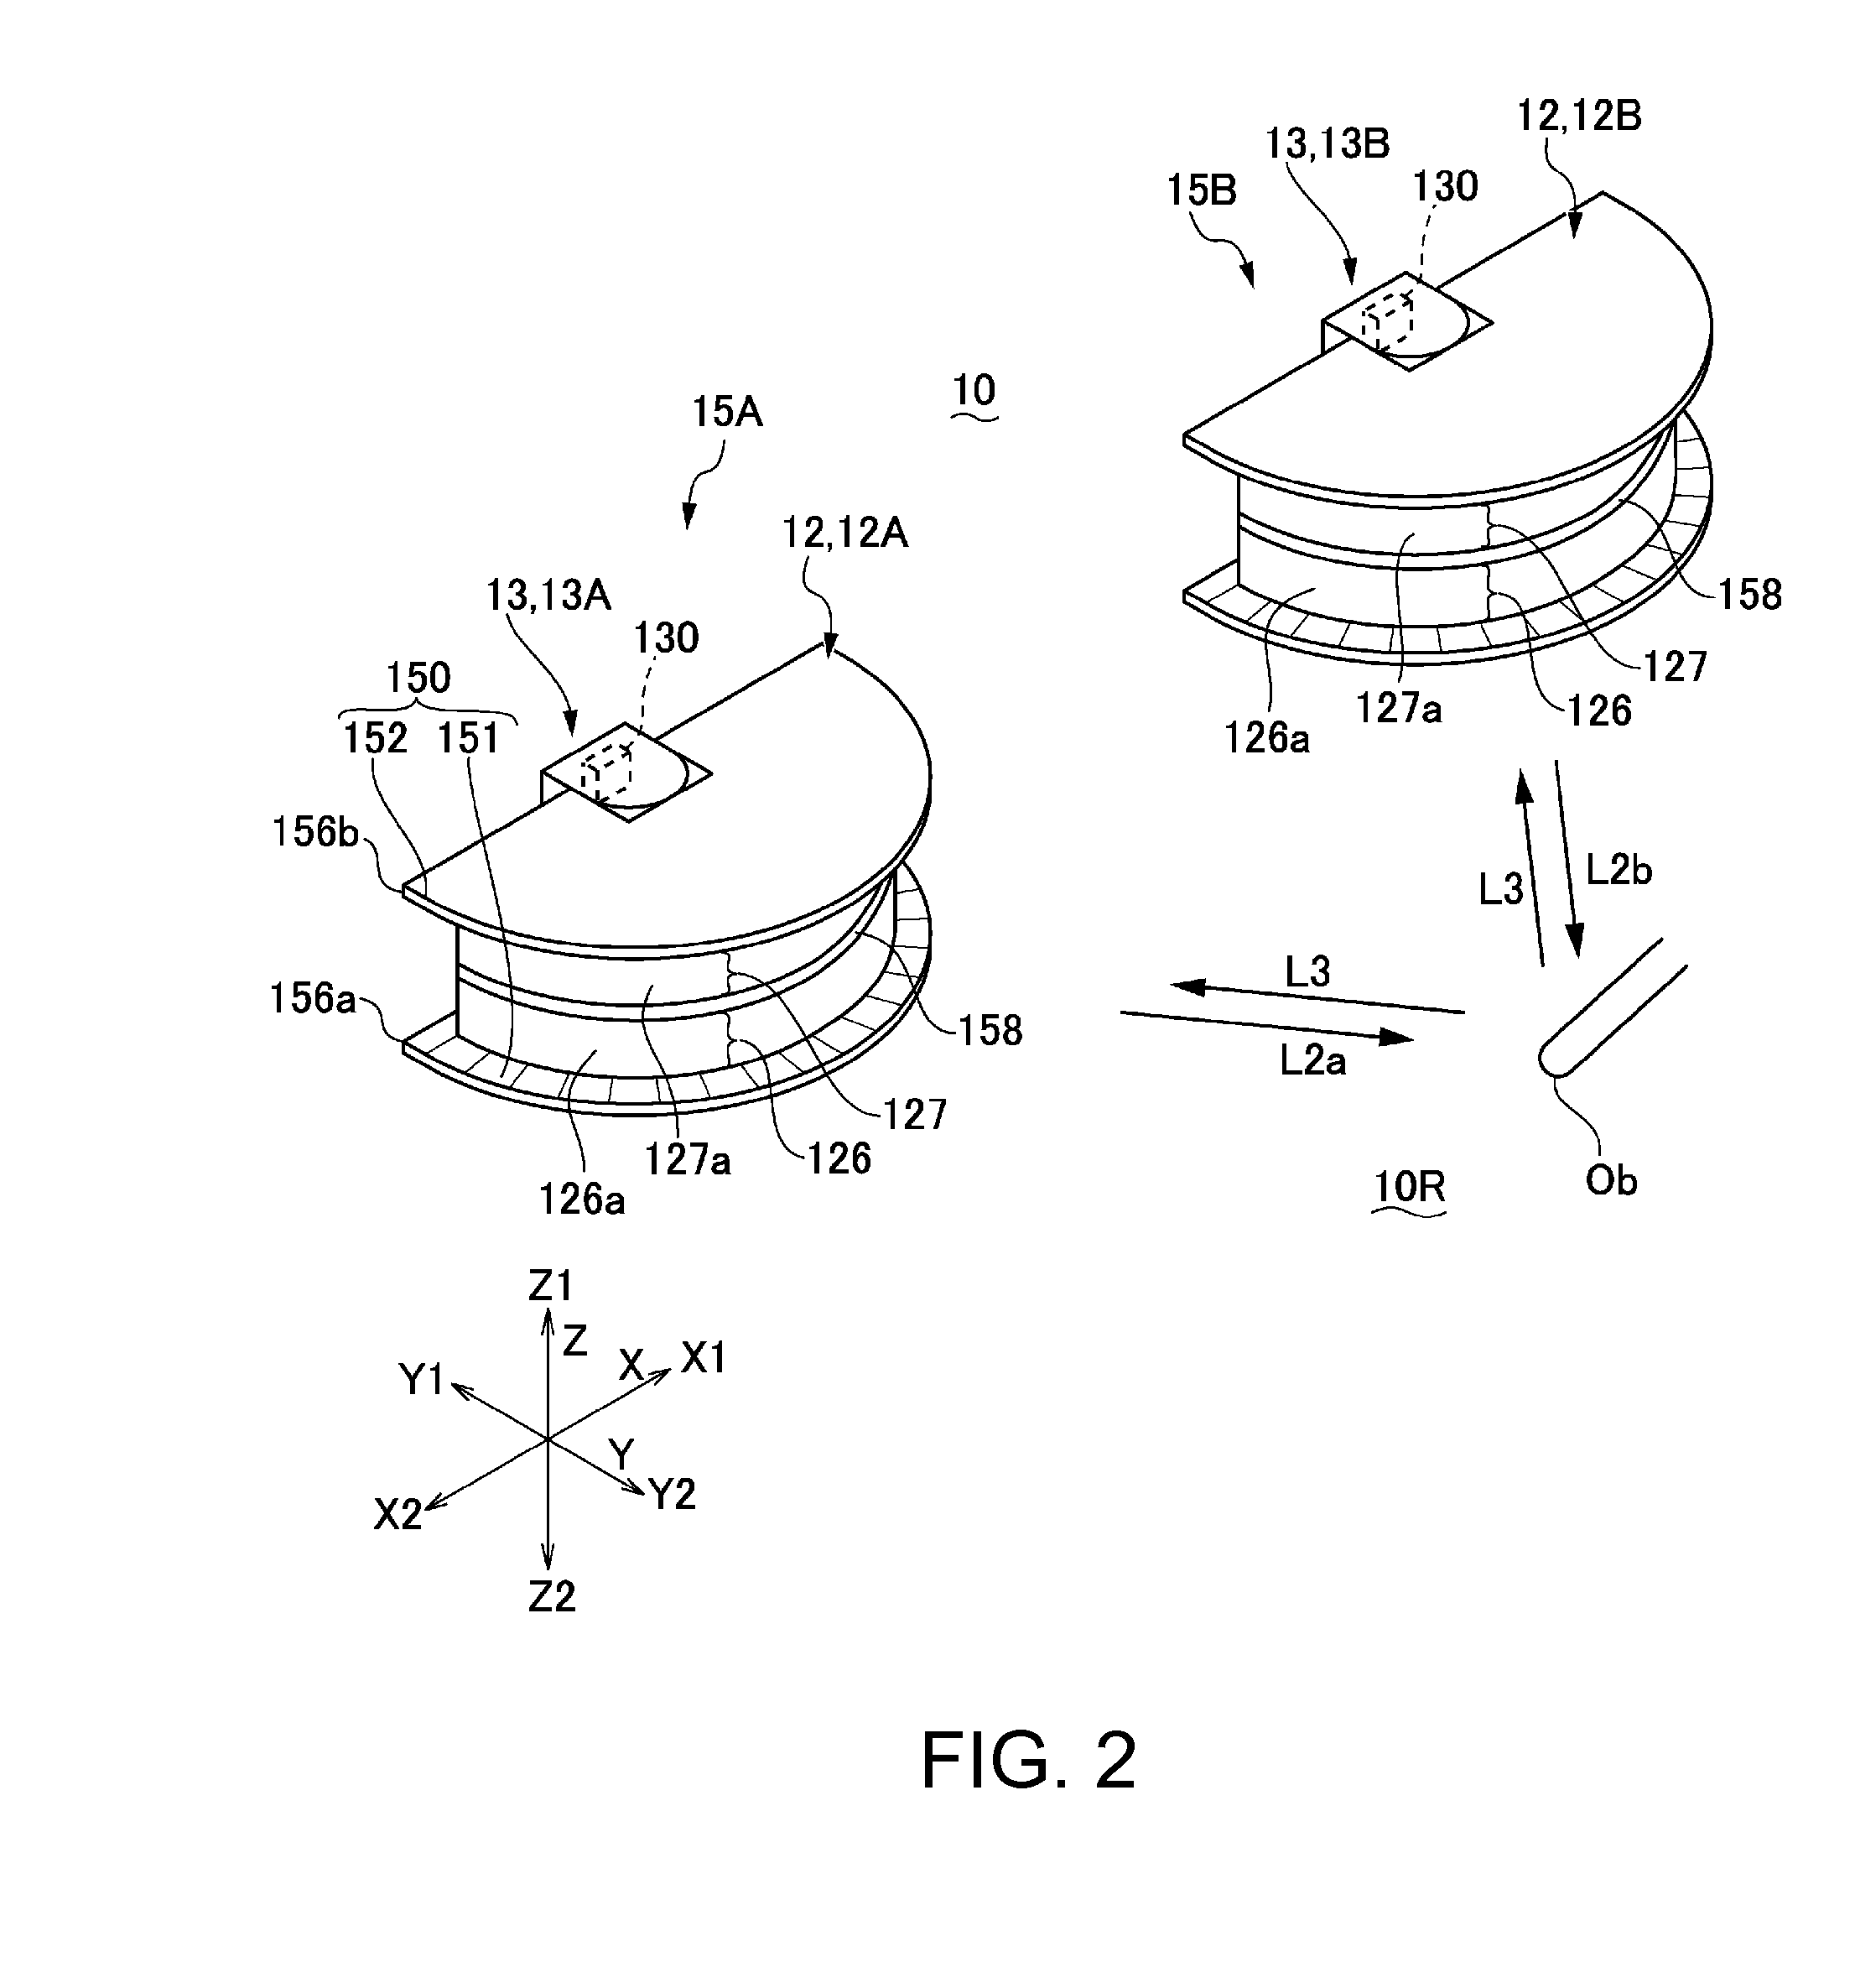 Optical position detection device, optical position detection system, and display system with input function